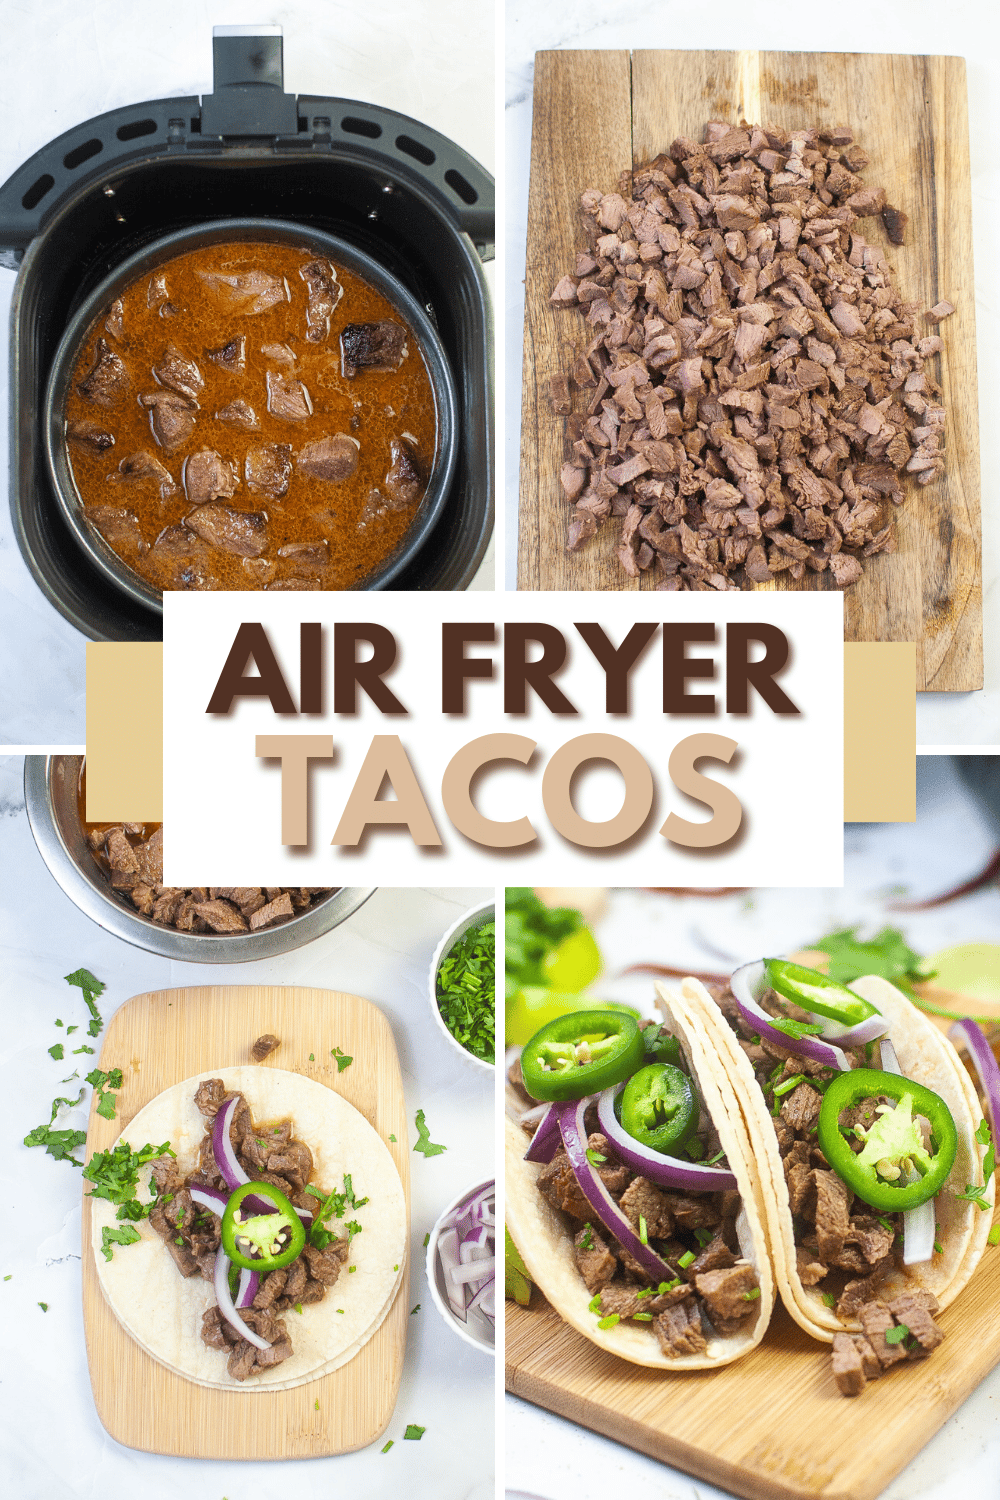 These Air Fryer Tacos are amazing. The beef is so juicy and flavorful, and the shells get nice and soft. This is a must-try recipe! #airfryertacos #steakstreettacos #tacosinairfryer #streetsteaktacos via @wondermomwannab